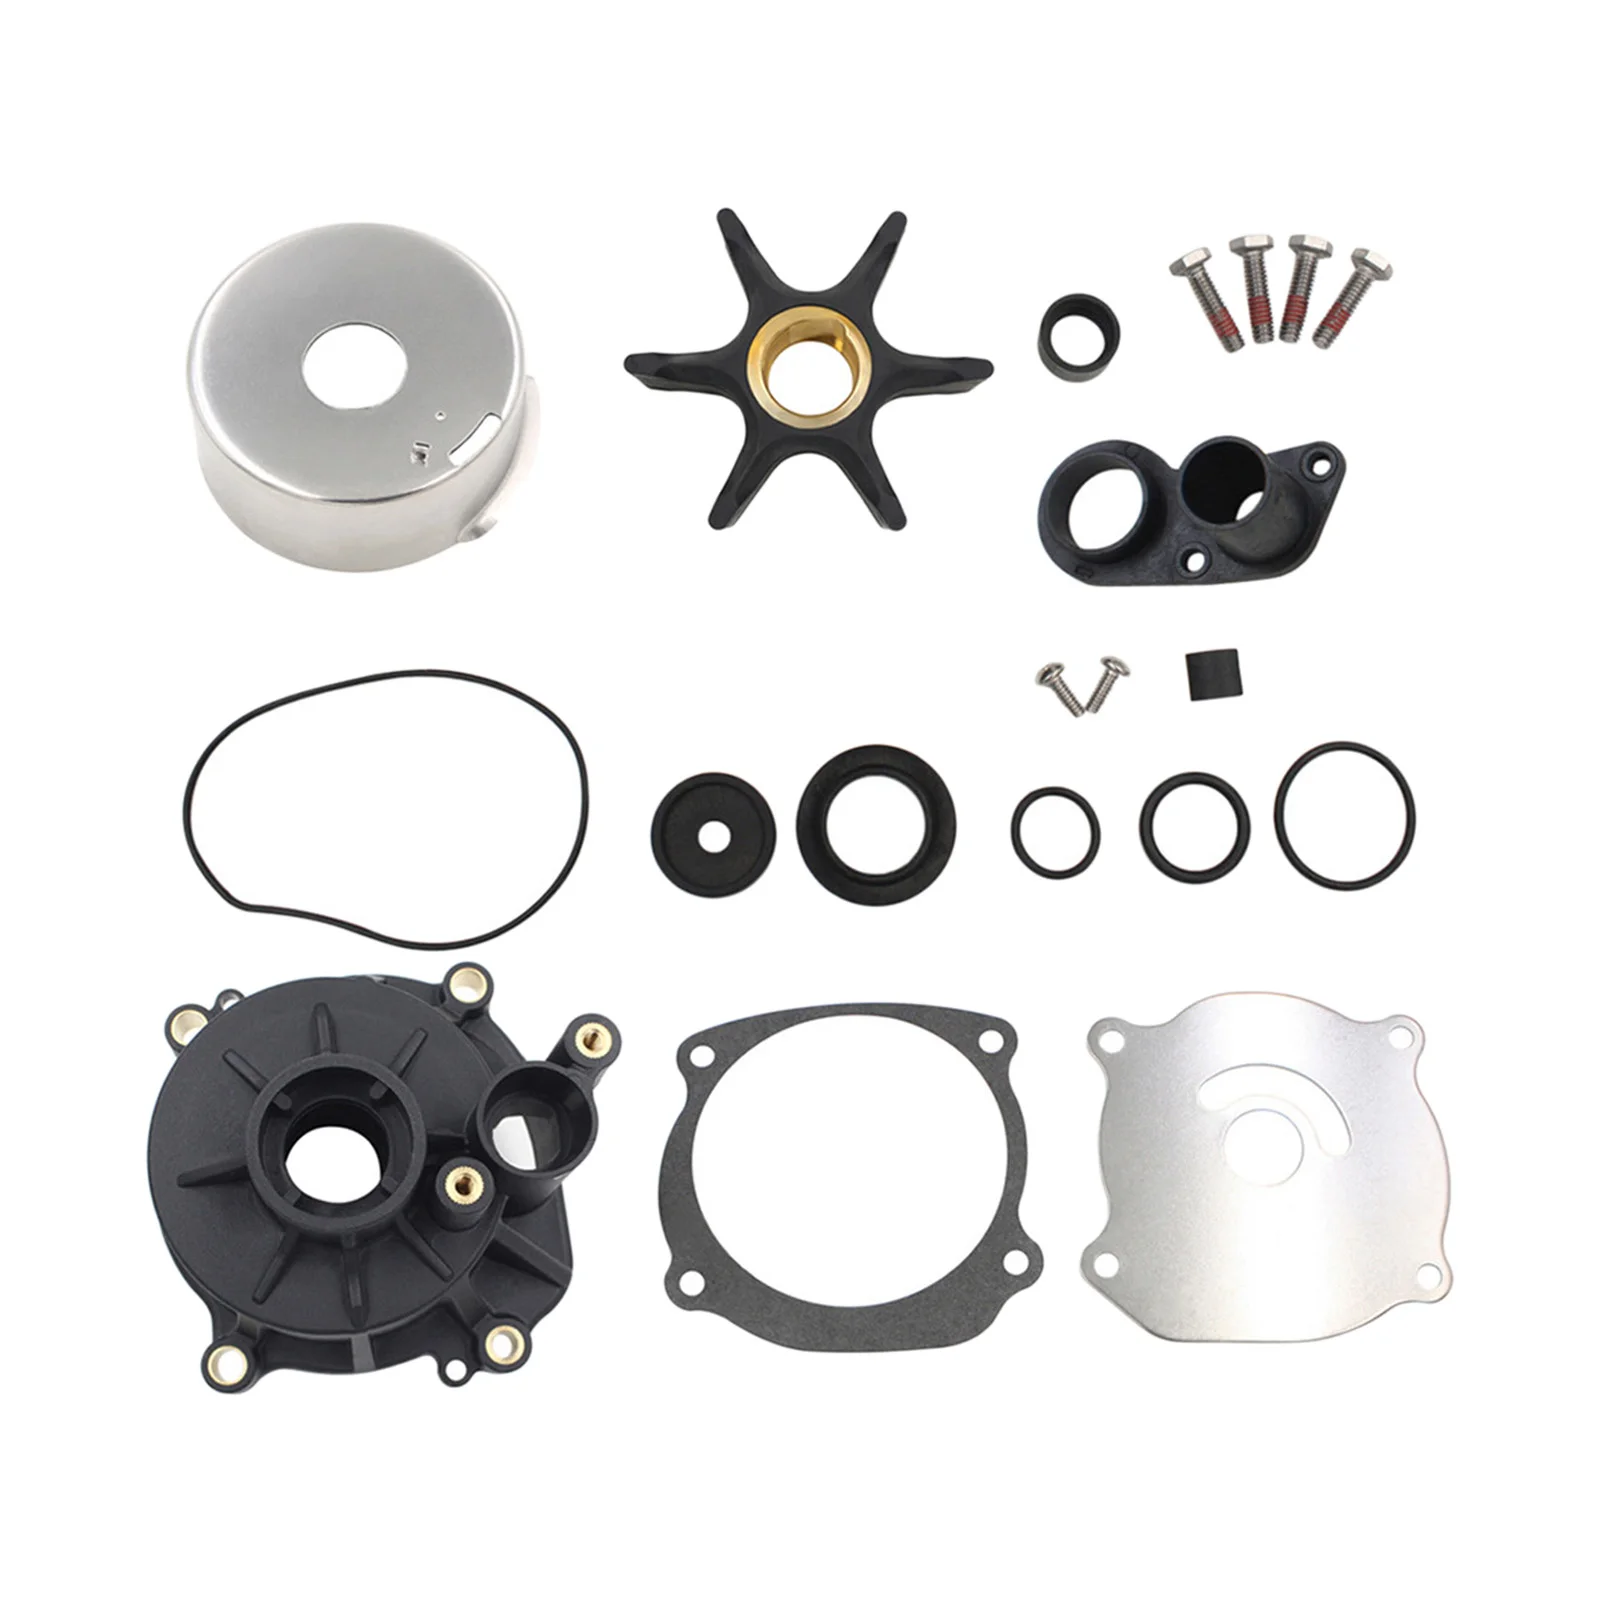 Boat Water Pump Repair Set with Housing for Johnson Evinrude Outboard OMC Motors 5001594 434421